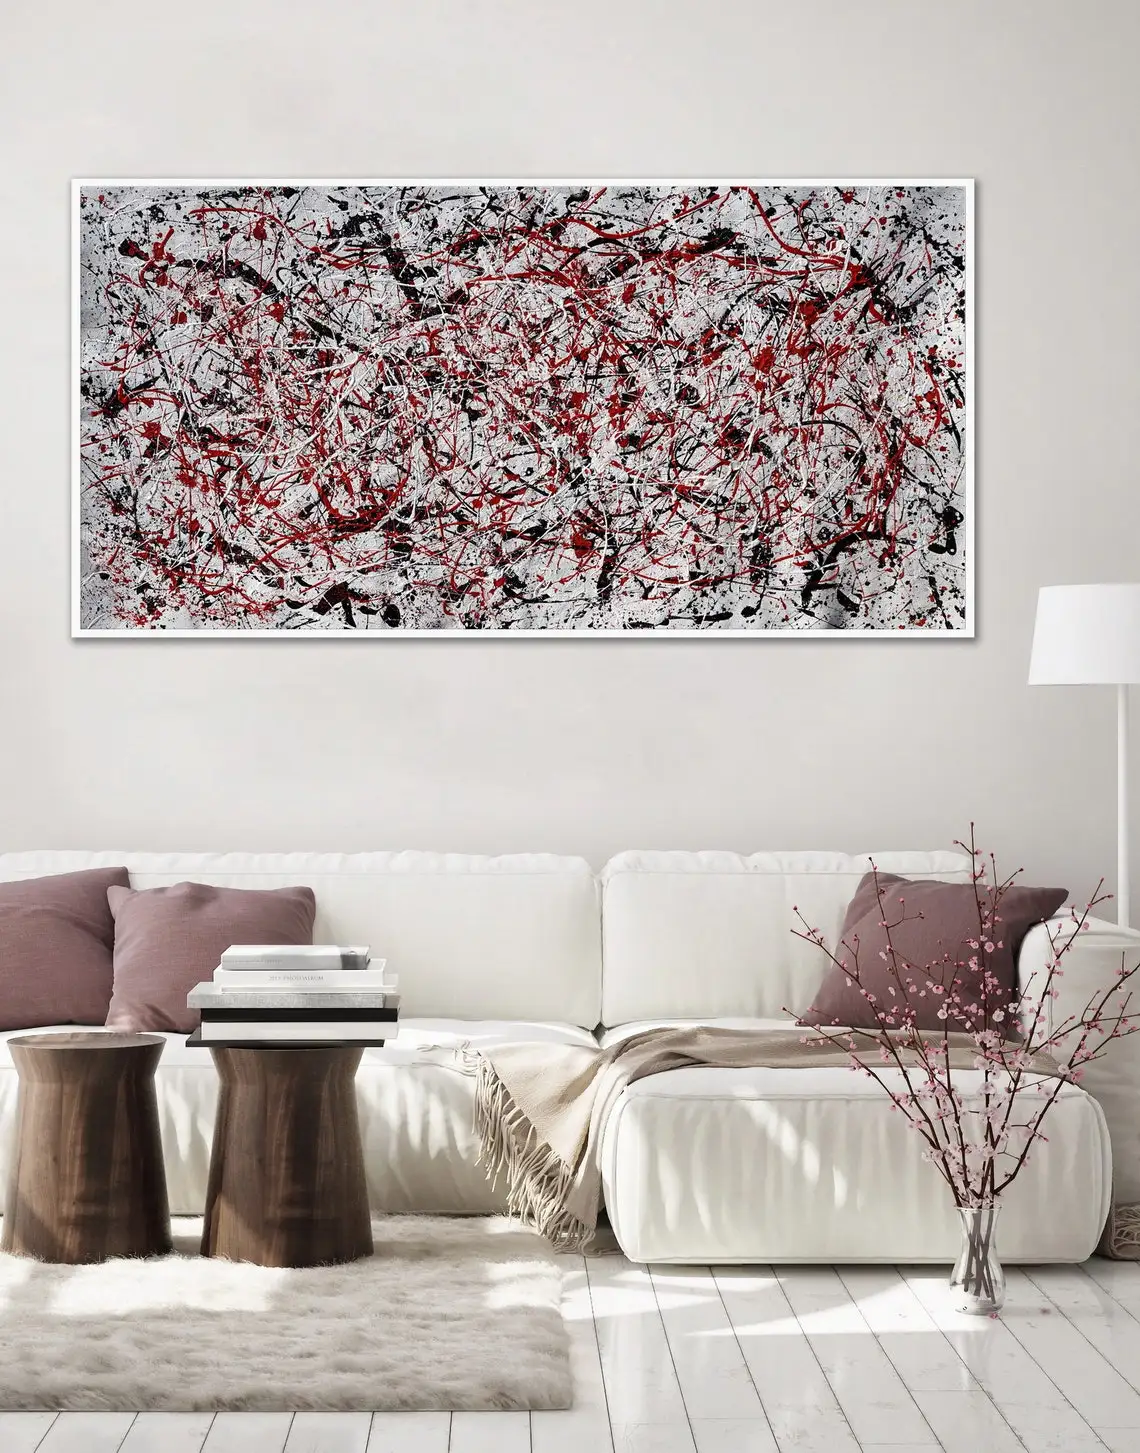 

Hand Painted Abstract Painting Canvas Art Black and Red Jackson Pollock Style Drip Painting Original Wall Art Home Room Decor